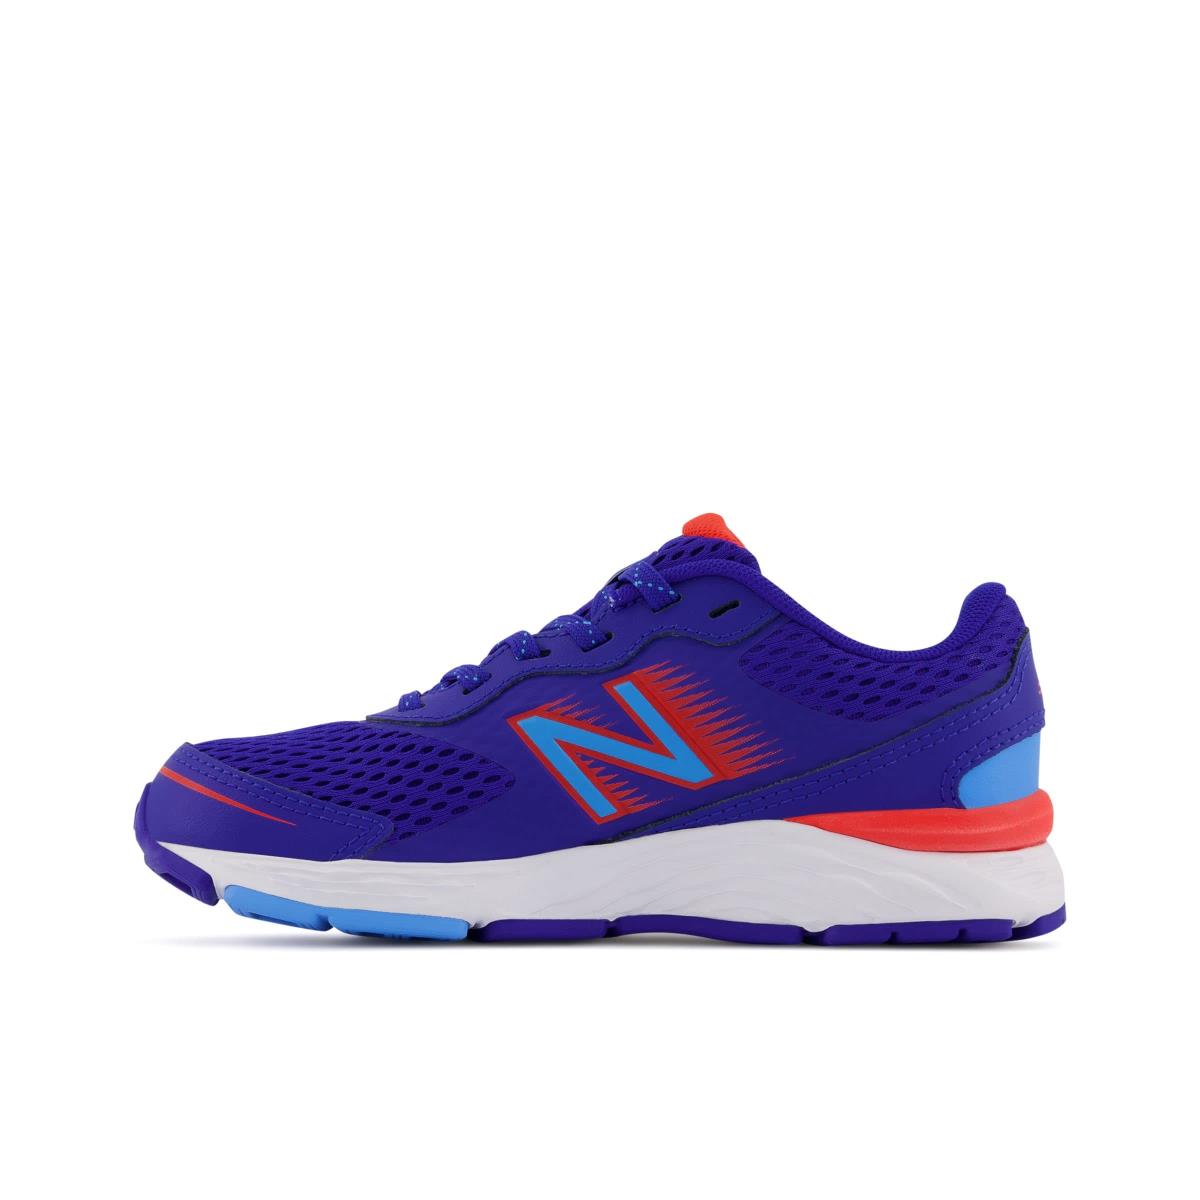 New Balance Kids` 680 V6 Lace-up Running Shoe Infinity Blue/Neo Flame/Vibrant Sky